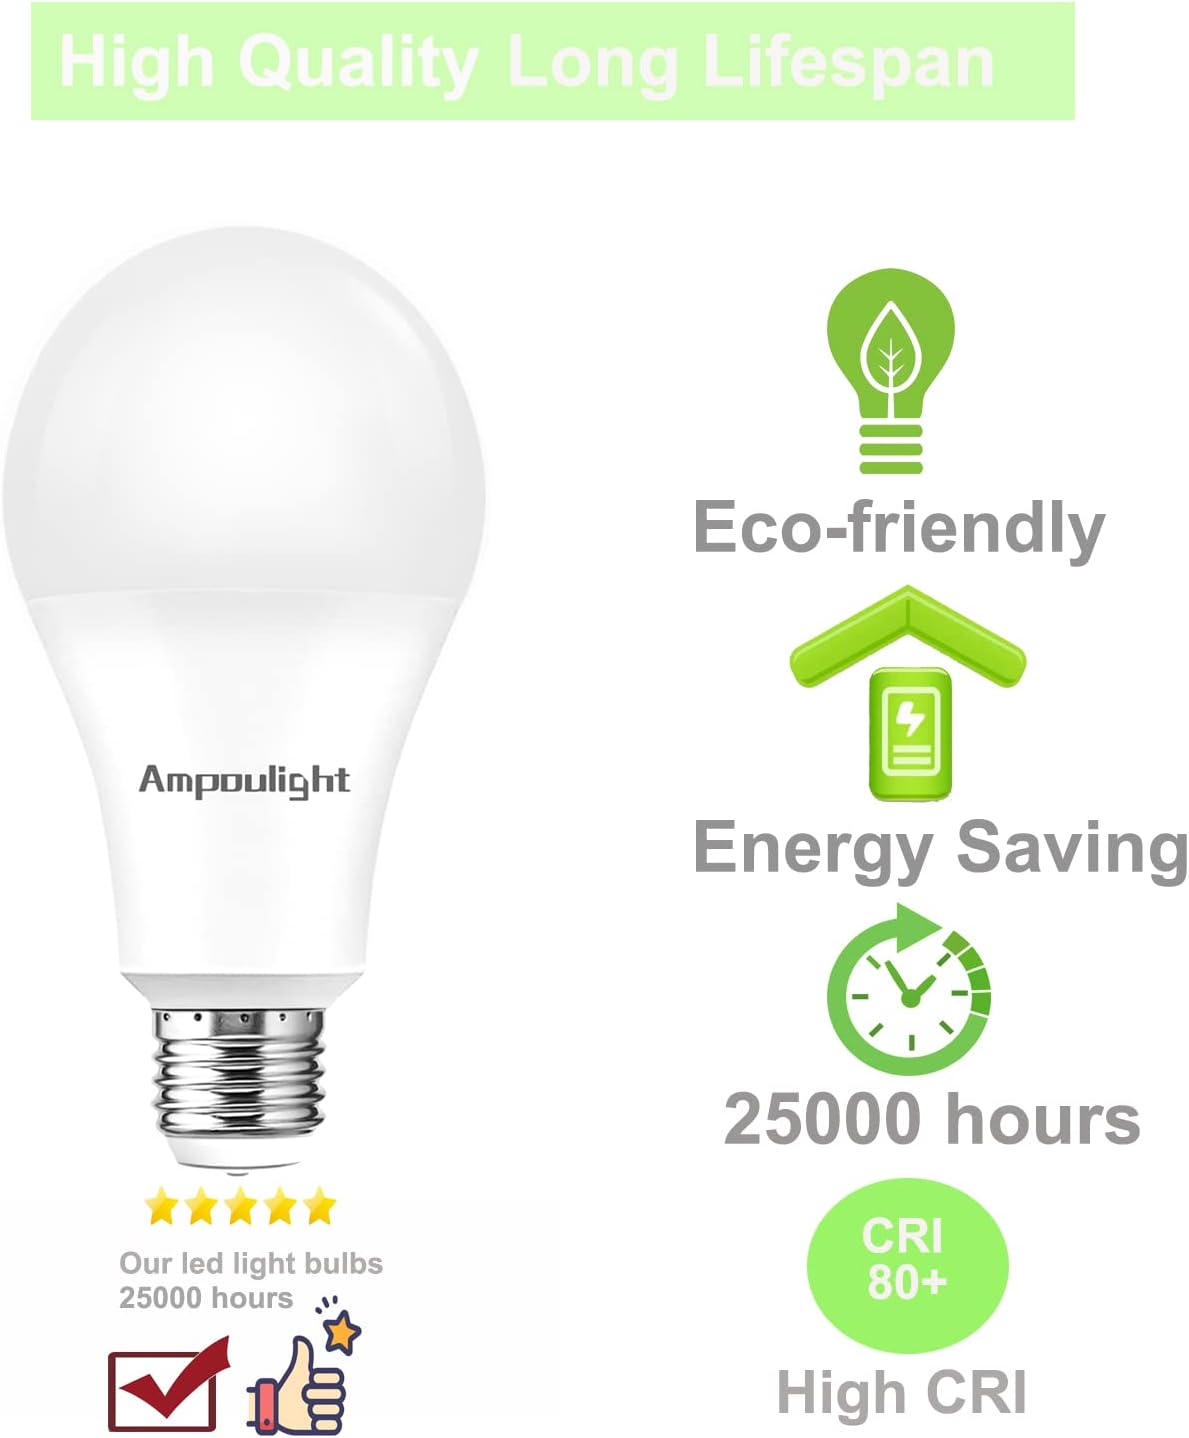 Ampoulight 3 Way Led Light Bulb Review